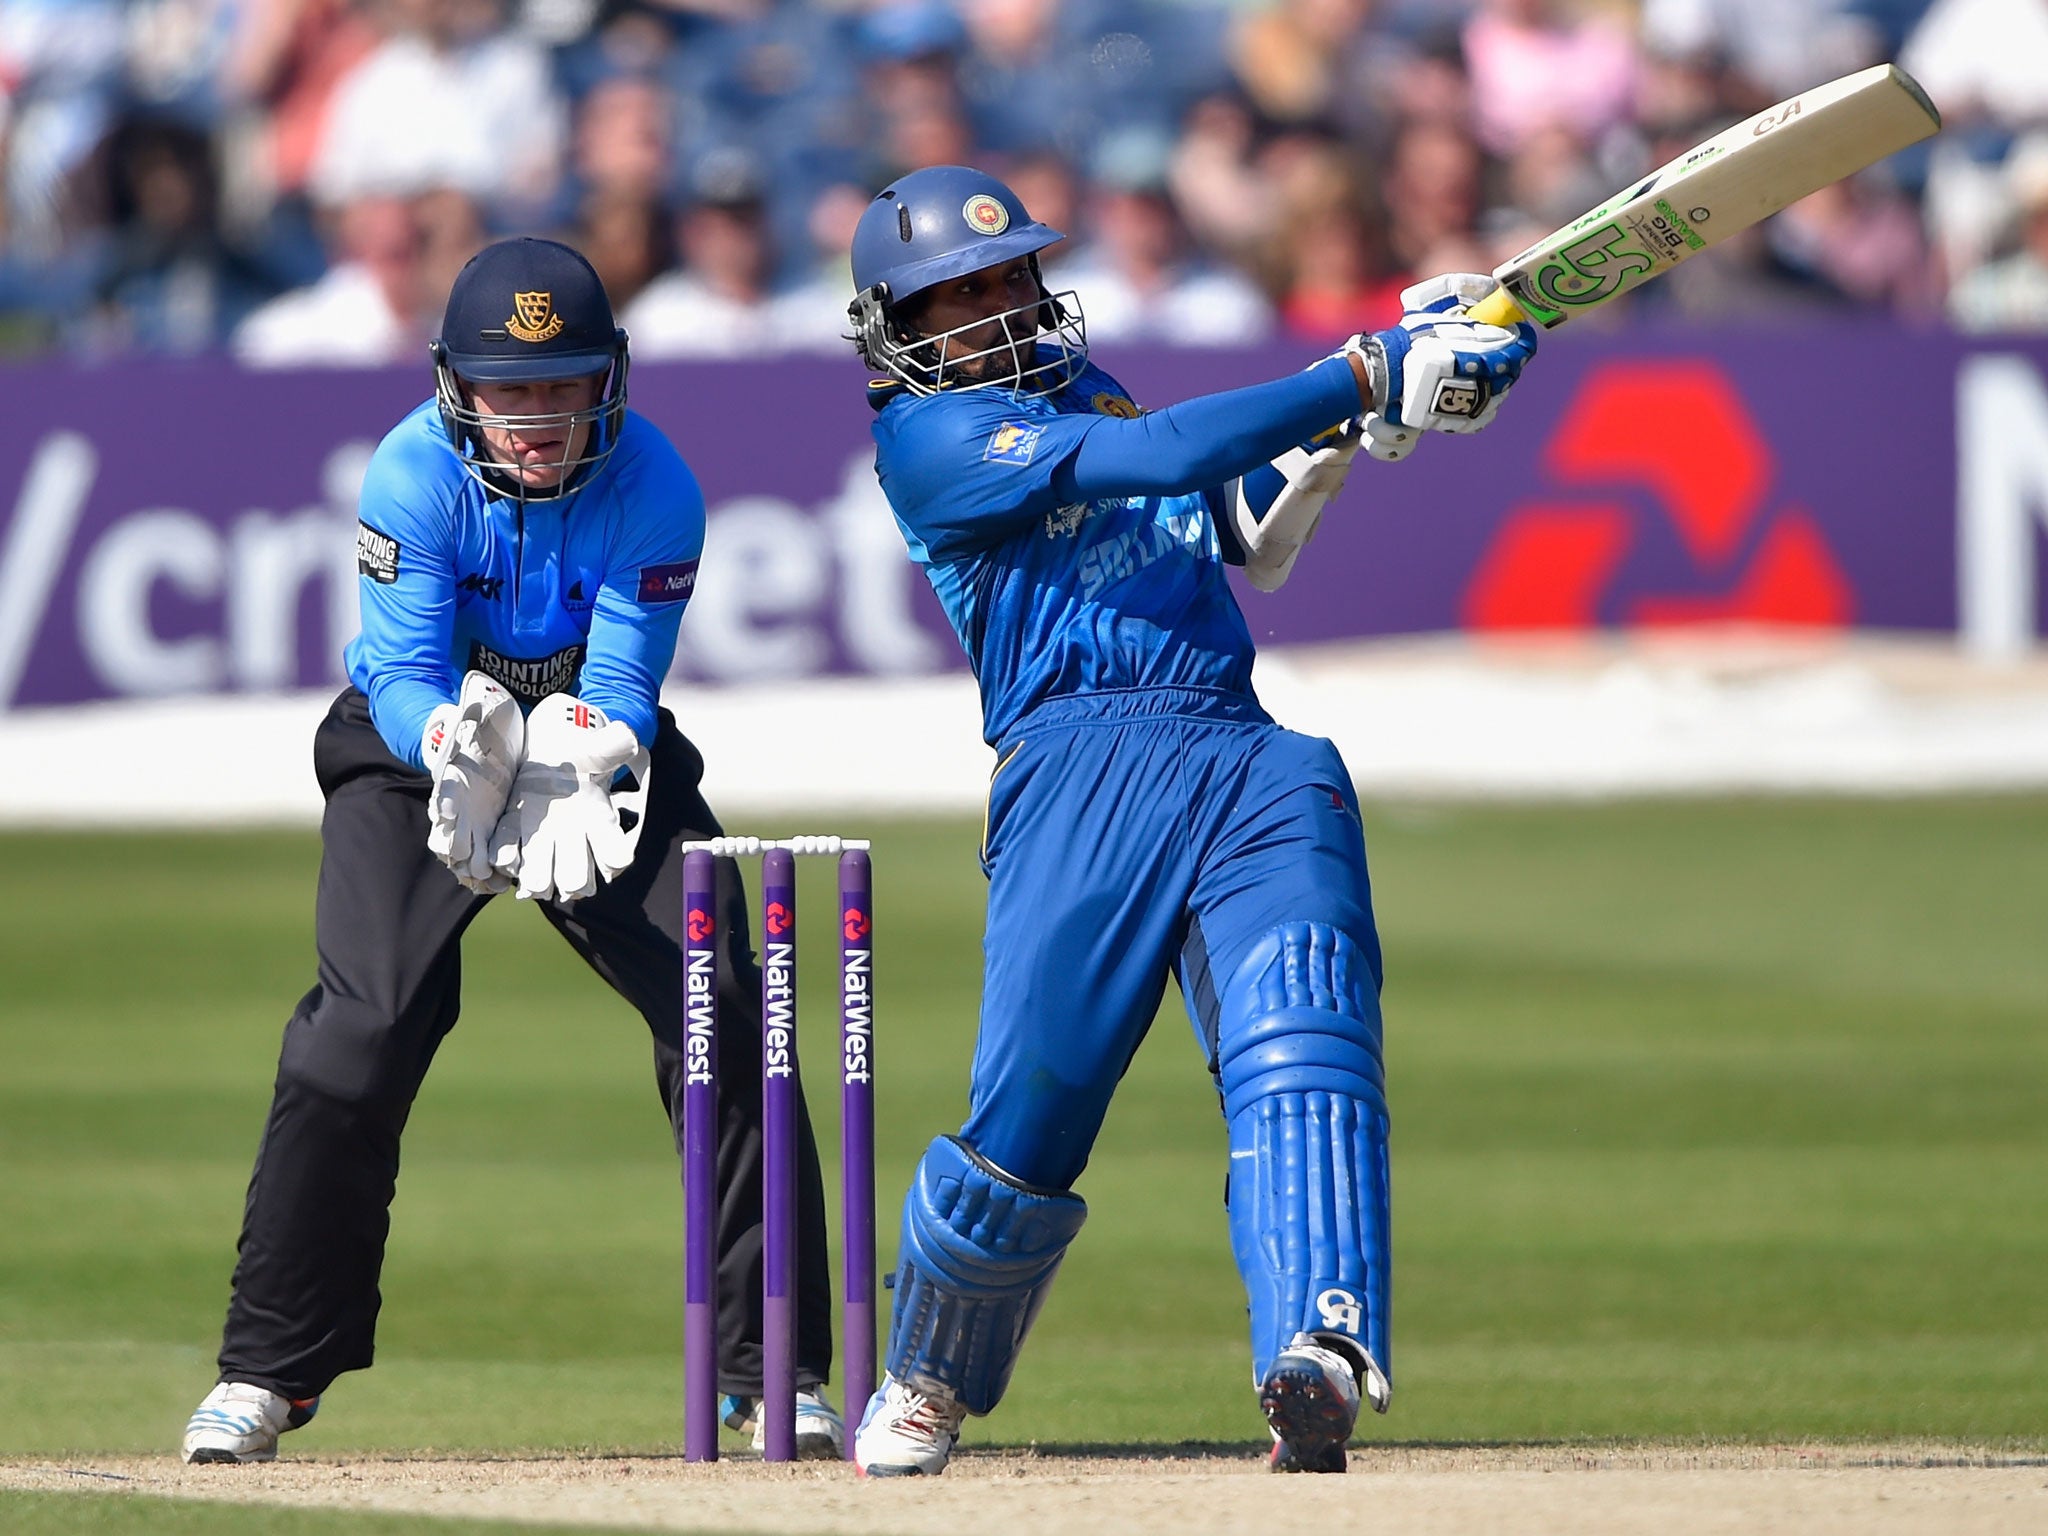 Tillekeratne Dilshan of Sri lanka smashes a boundary as wicketkeeper Ben Brown of Sussex looks on